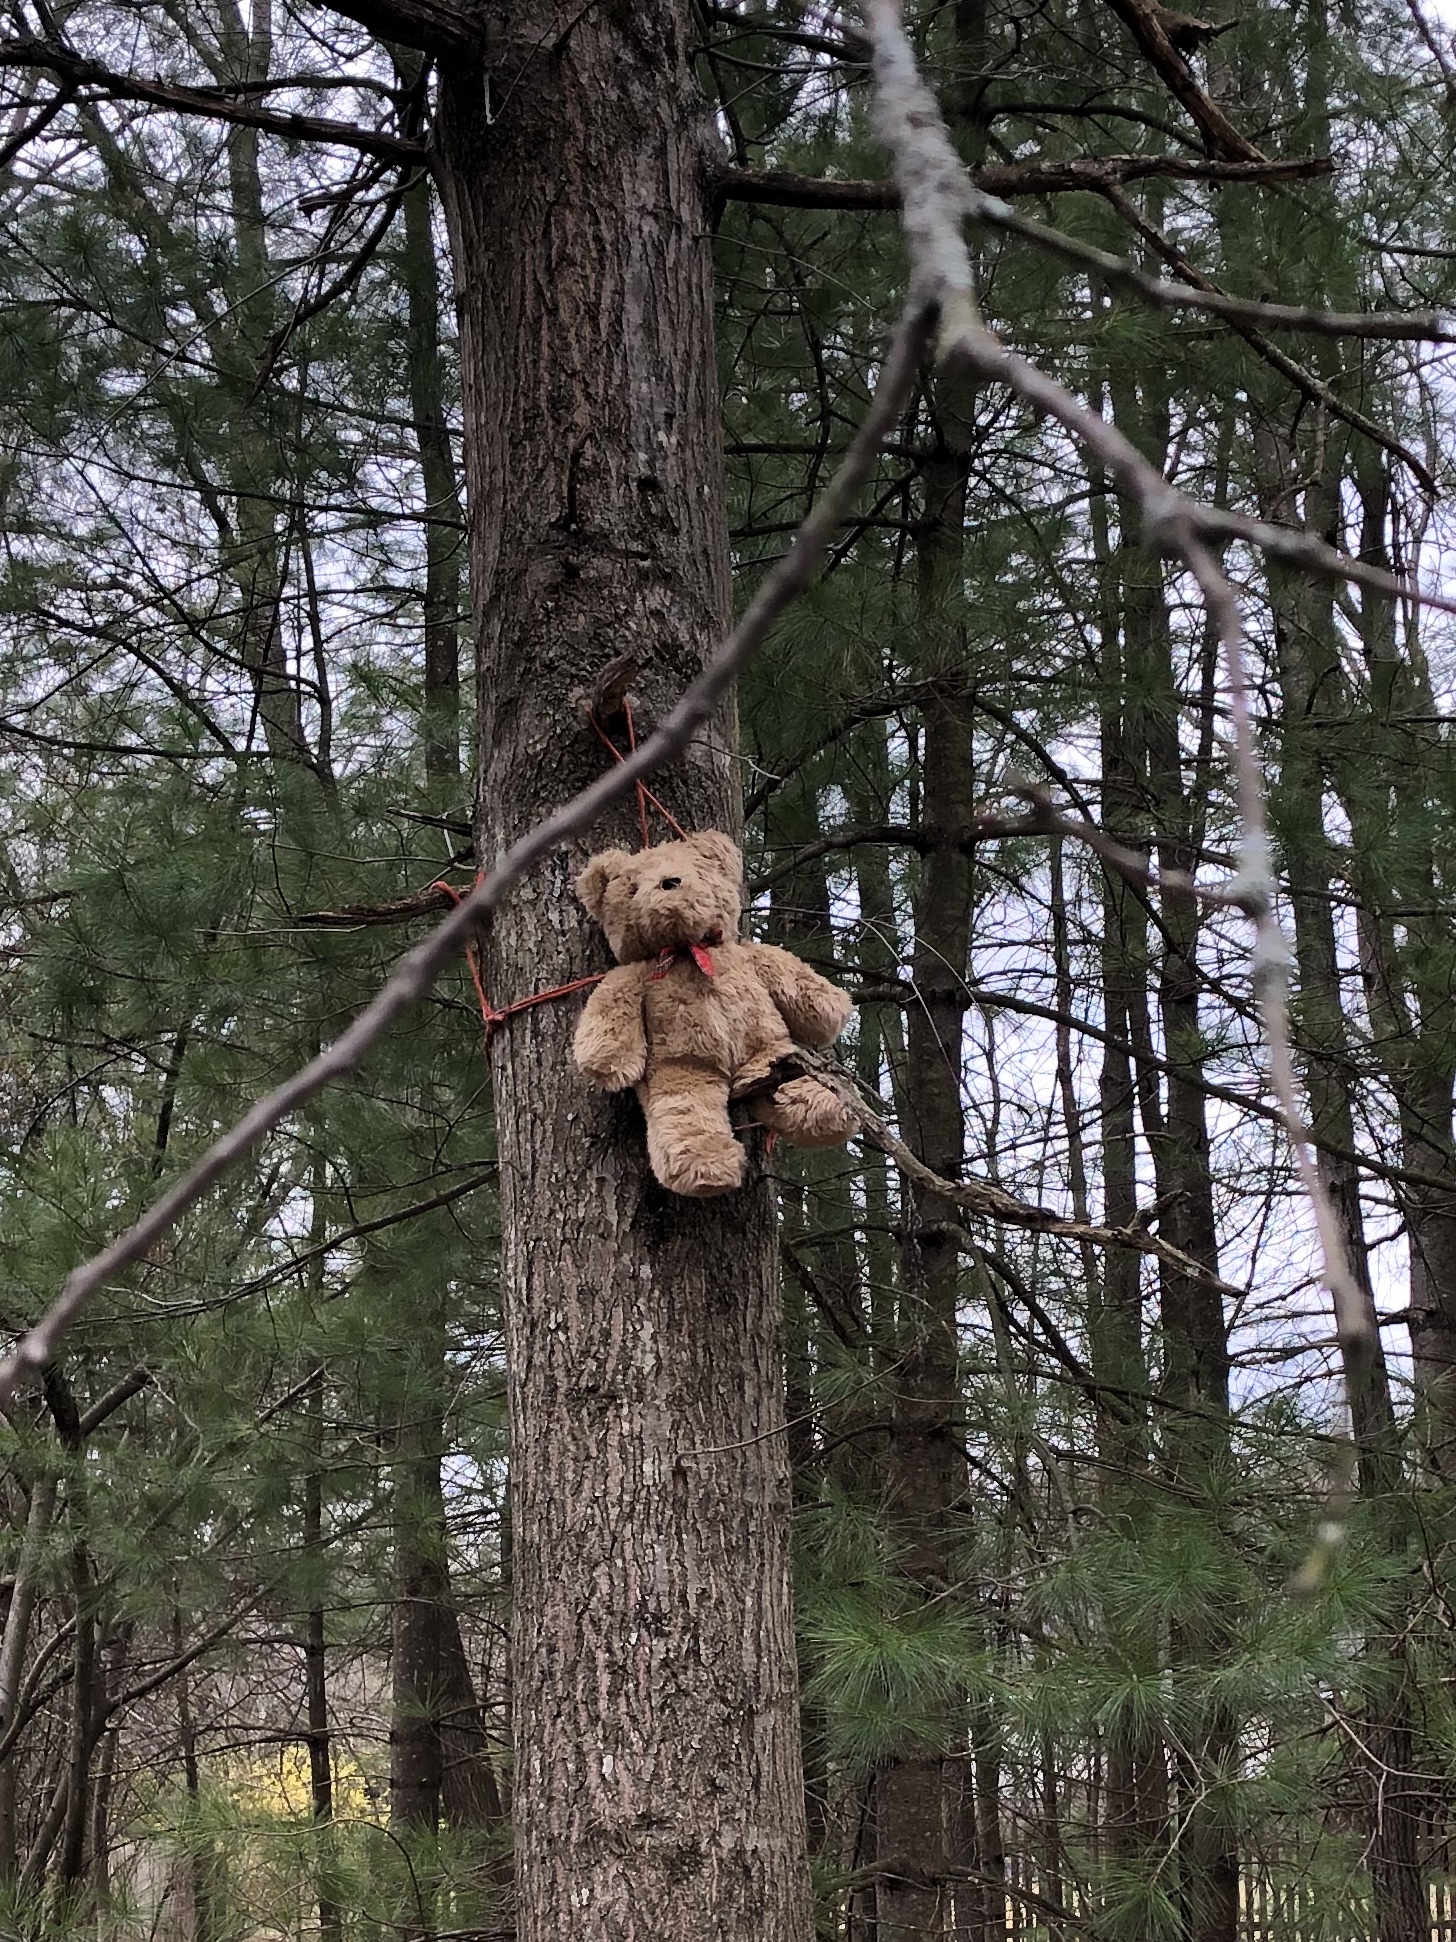 040820-are-there-bears-in-the-woods?